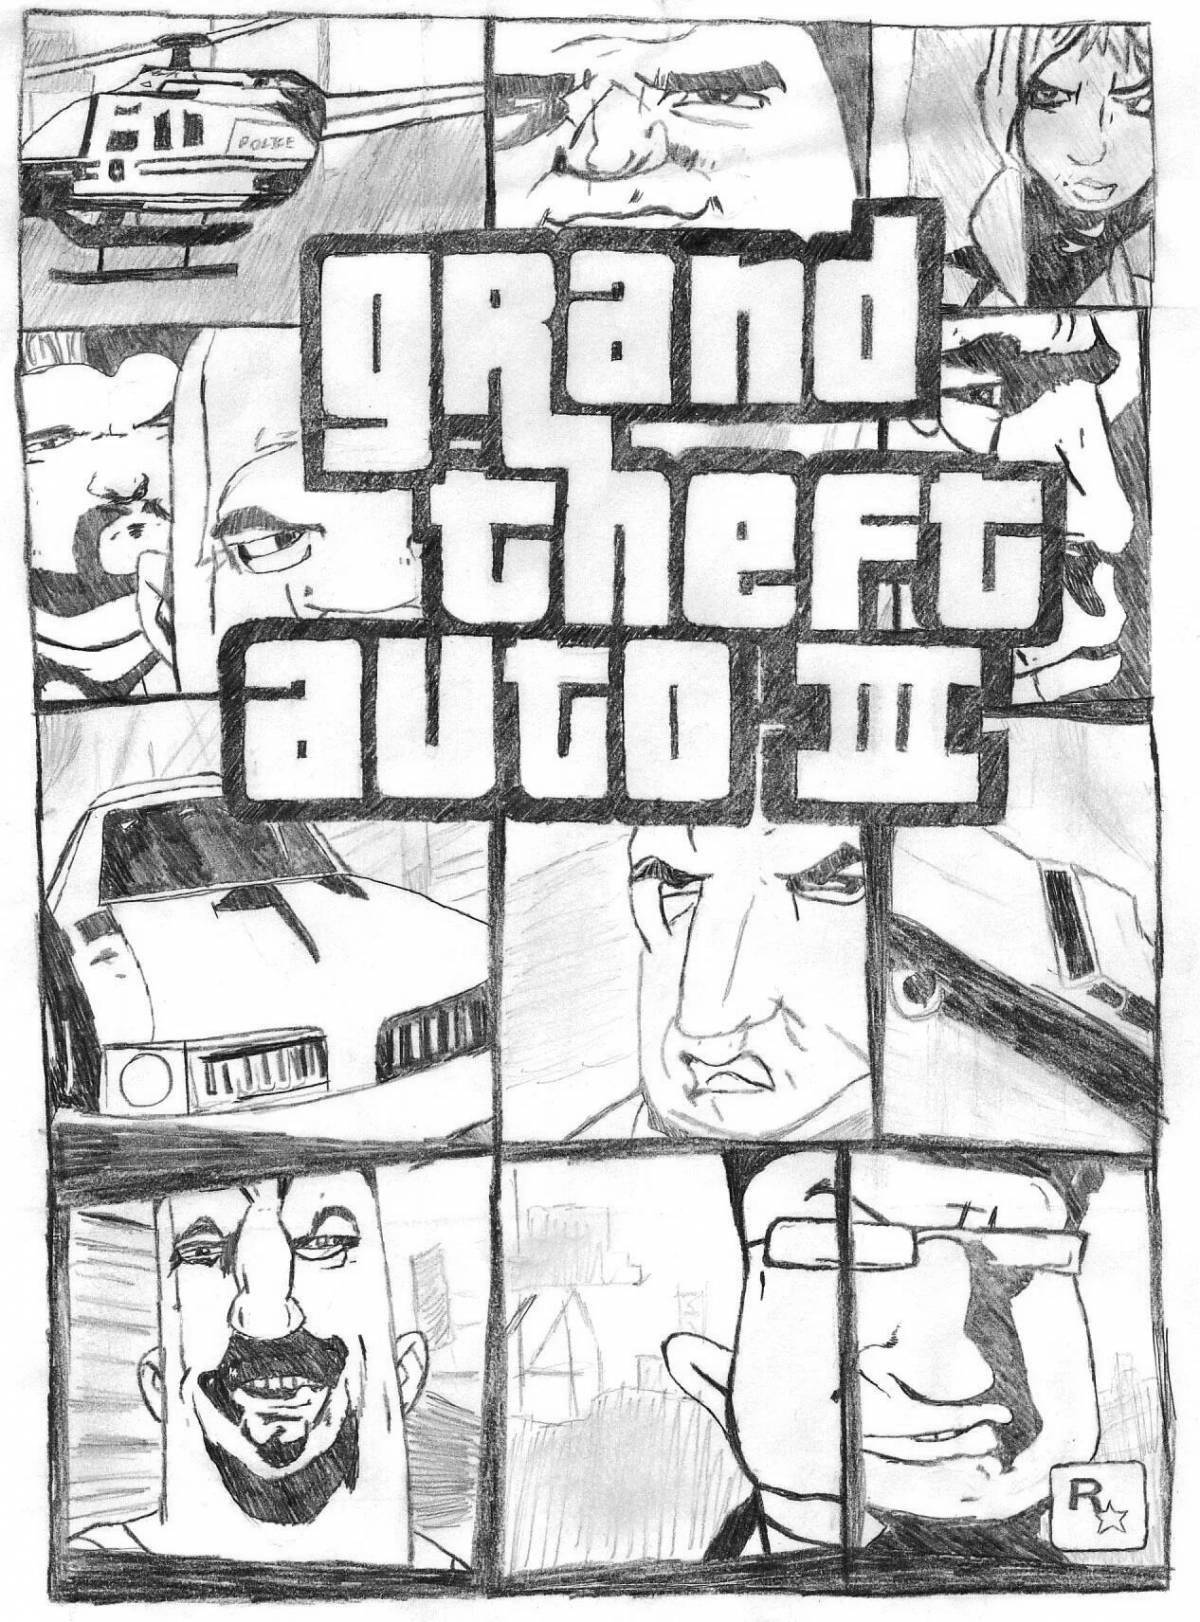 Tempting coloring page of gta 5 games